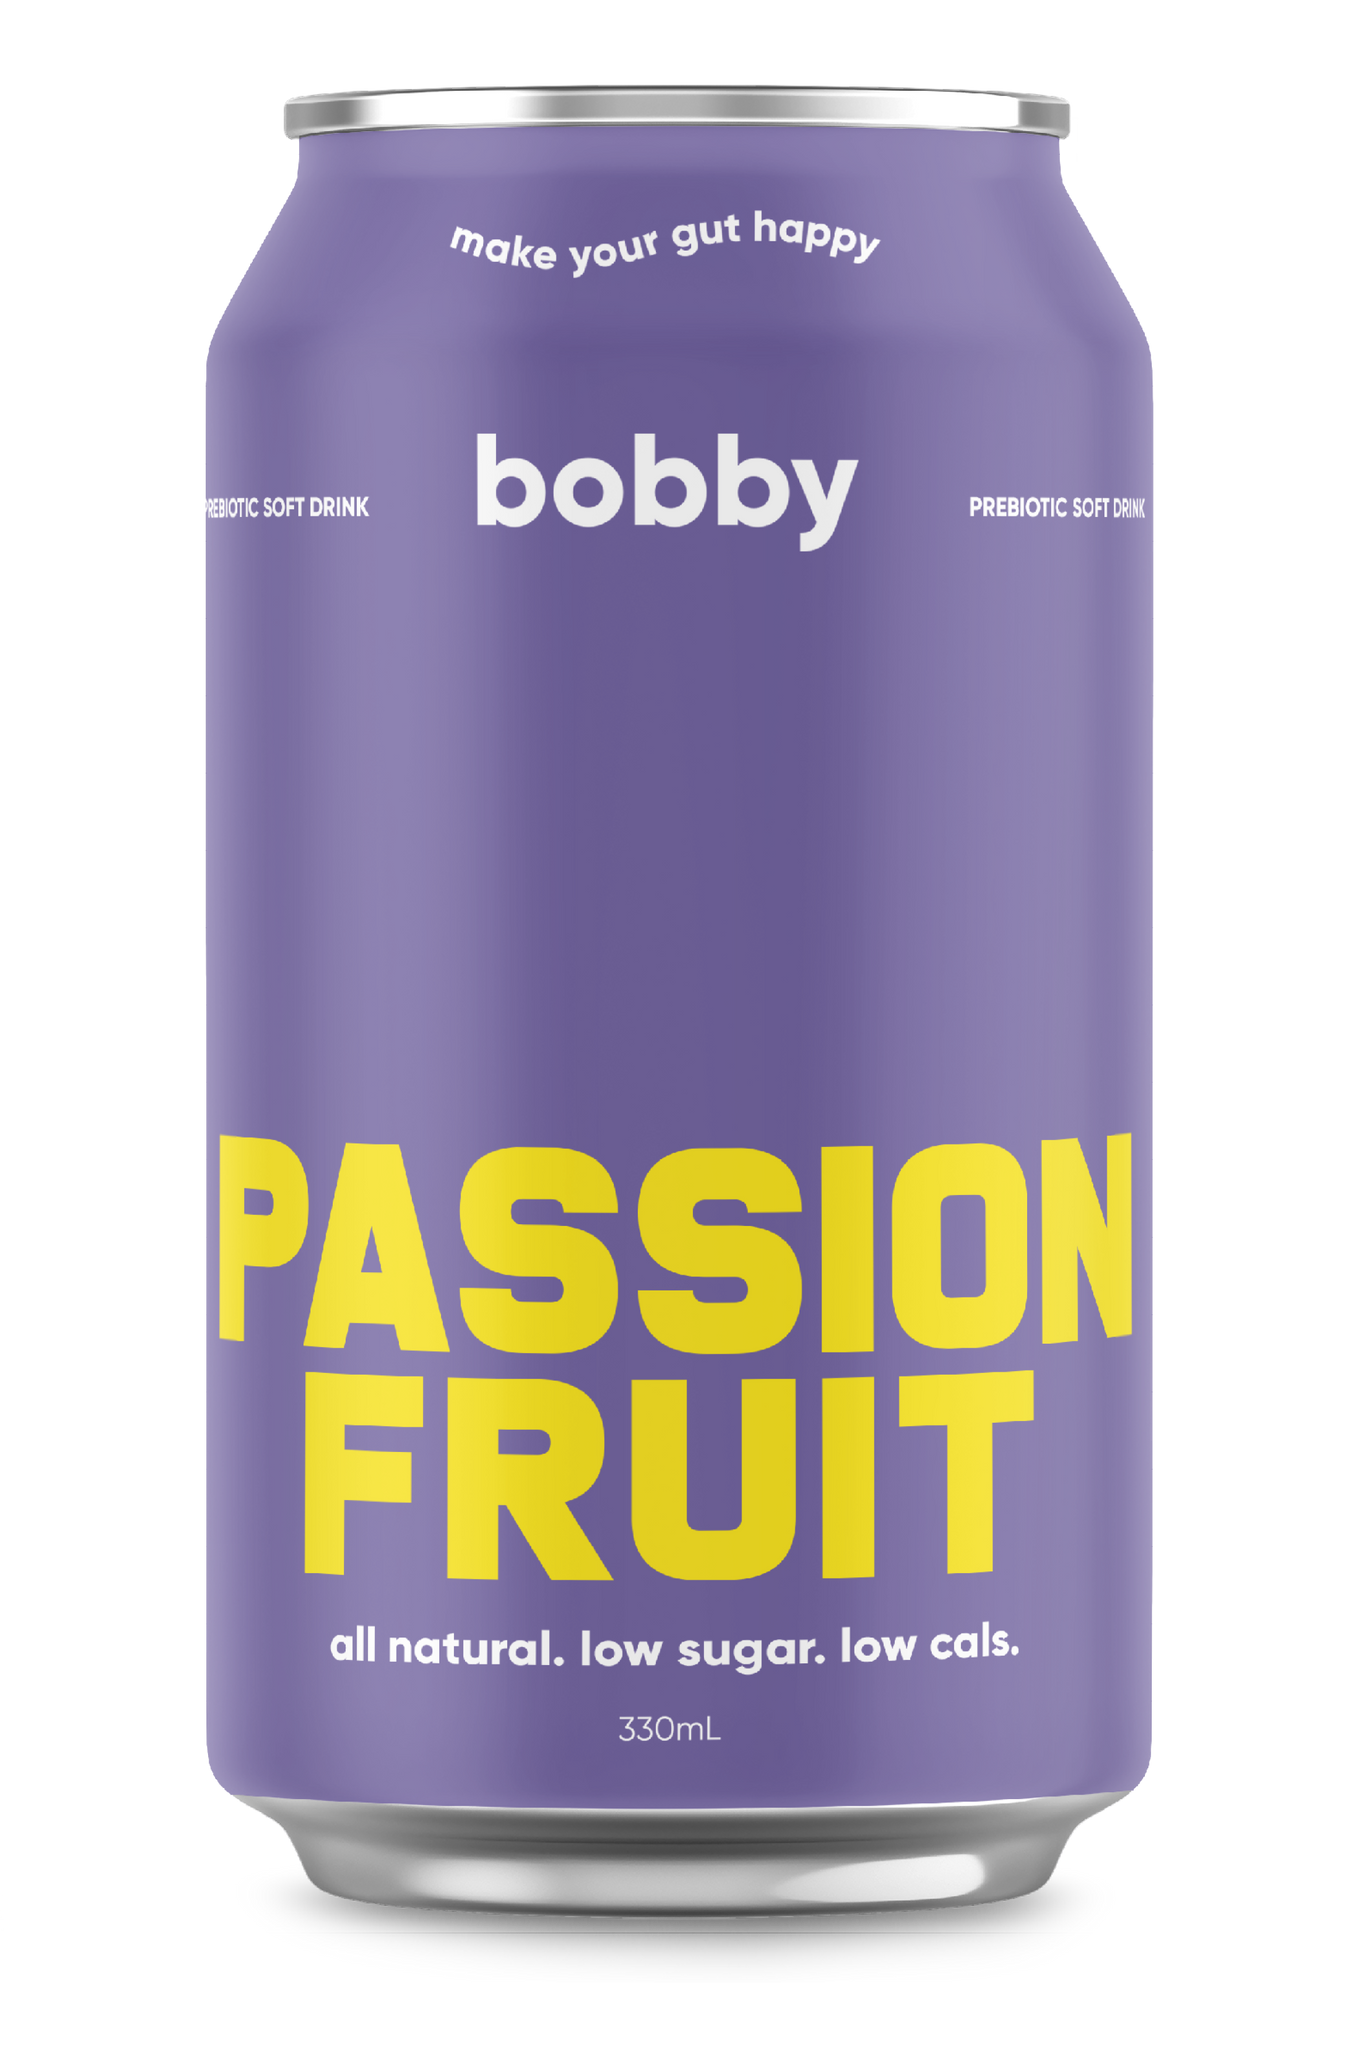 passiona with a twist, bobby passionfruit is all natural, low sugar and low calories